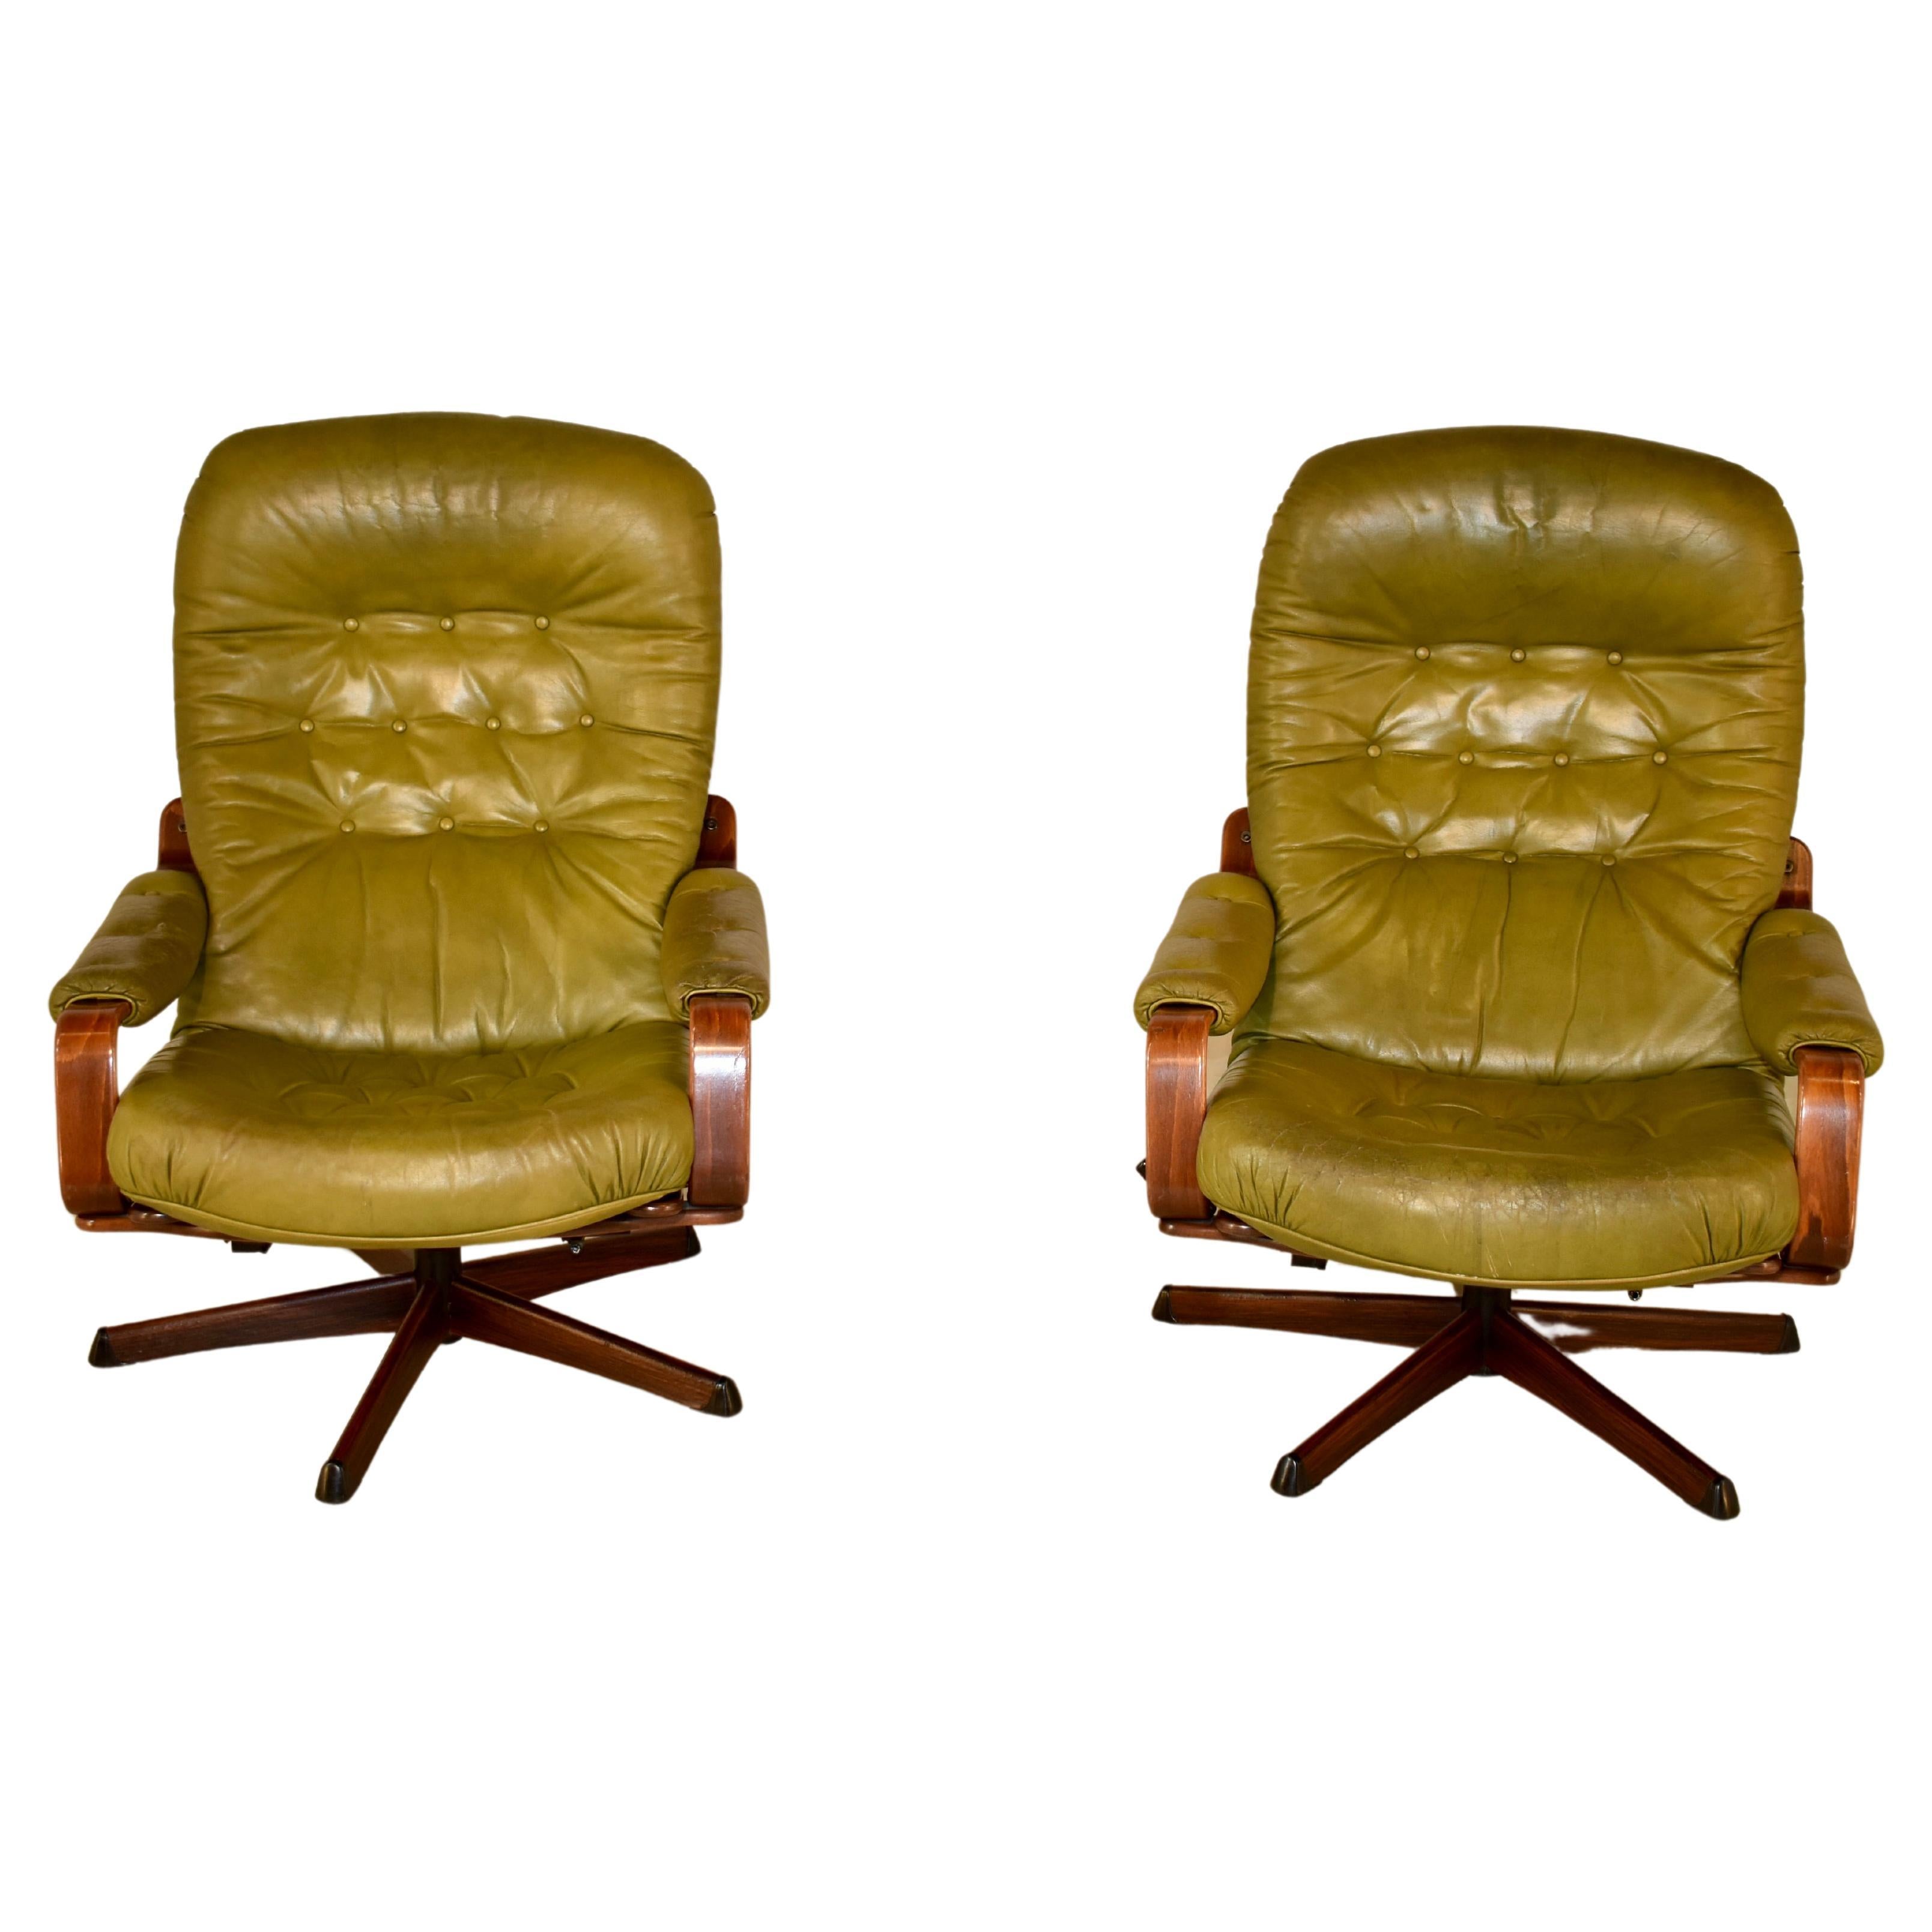 Pair of Göte Mobler Mid-Century Leather Chairs, circa 1960s For Sale